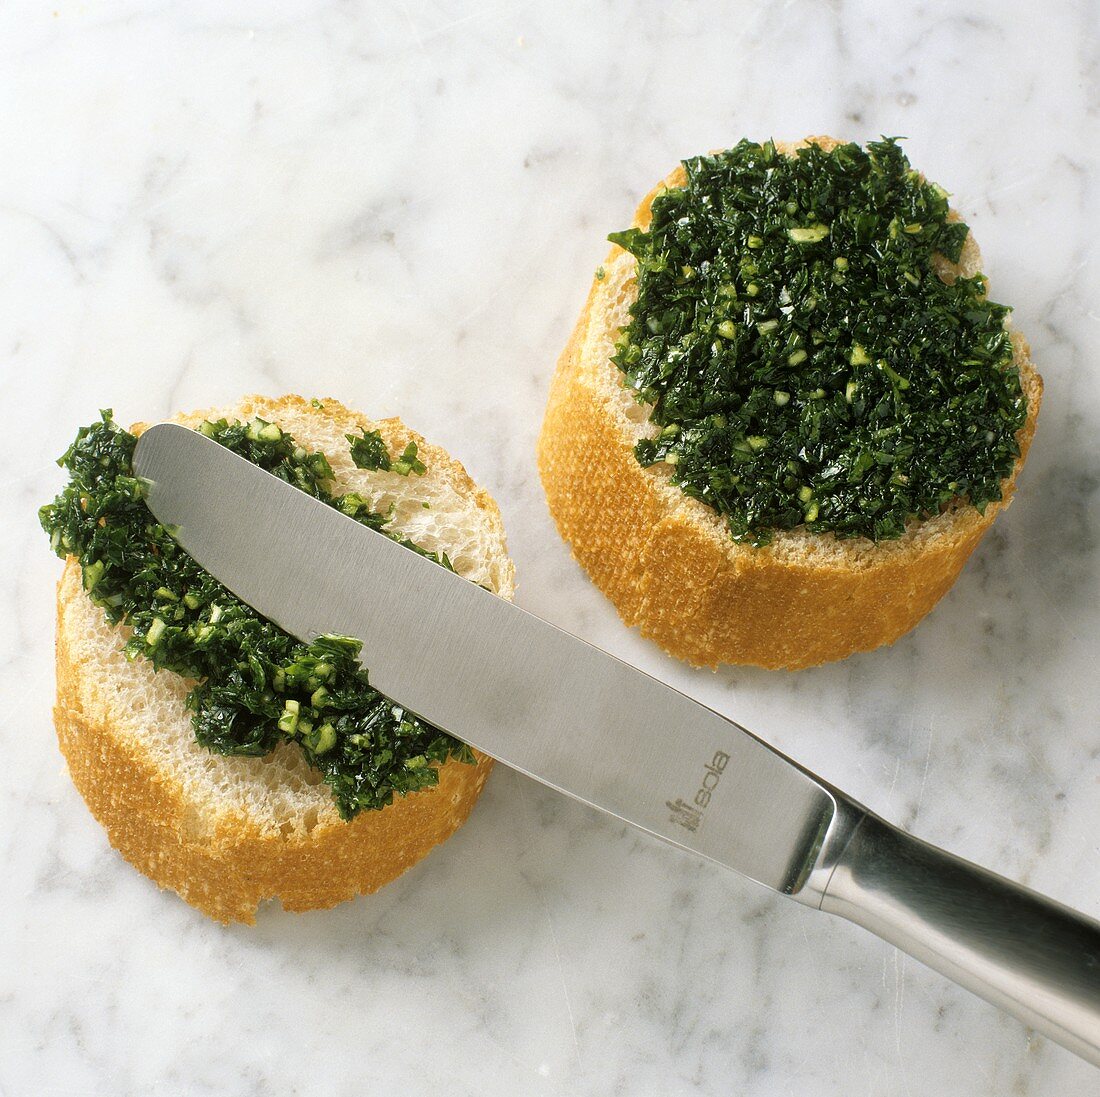 Baguette slices with parsley